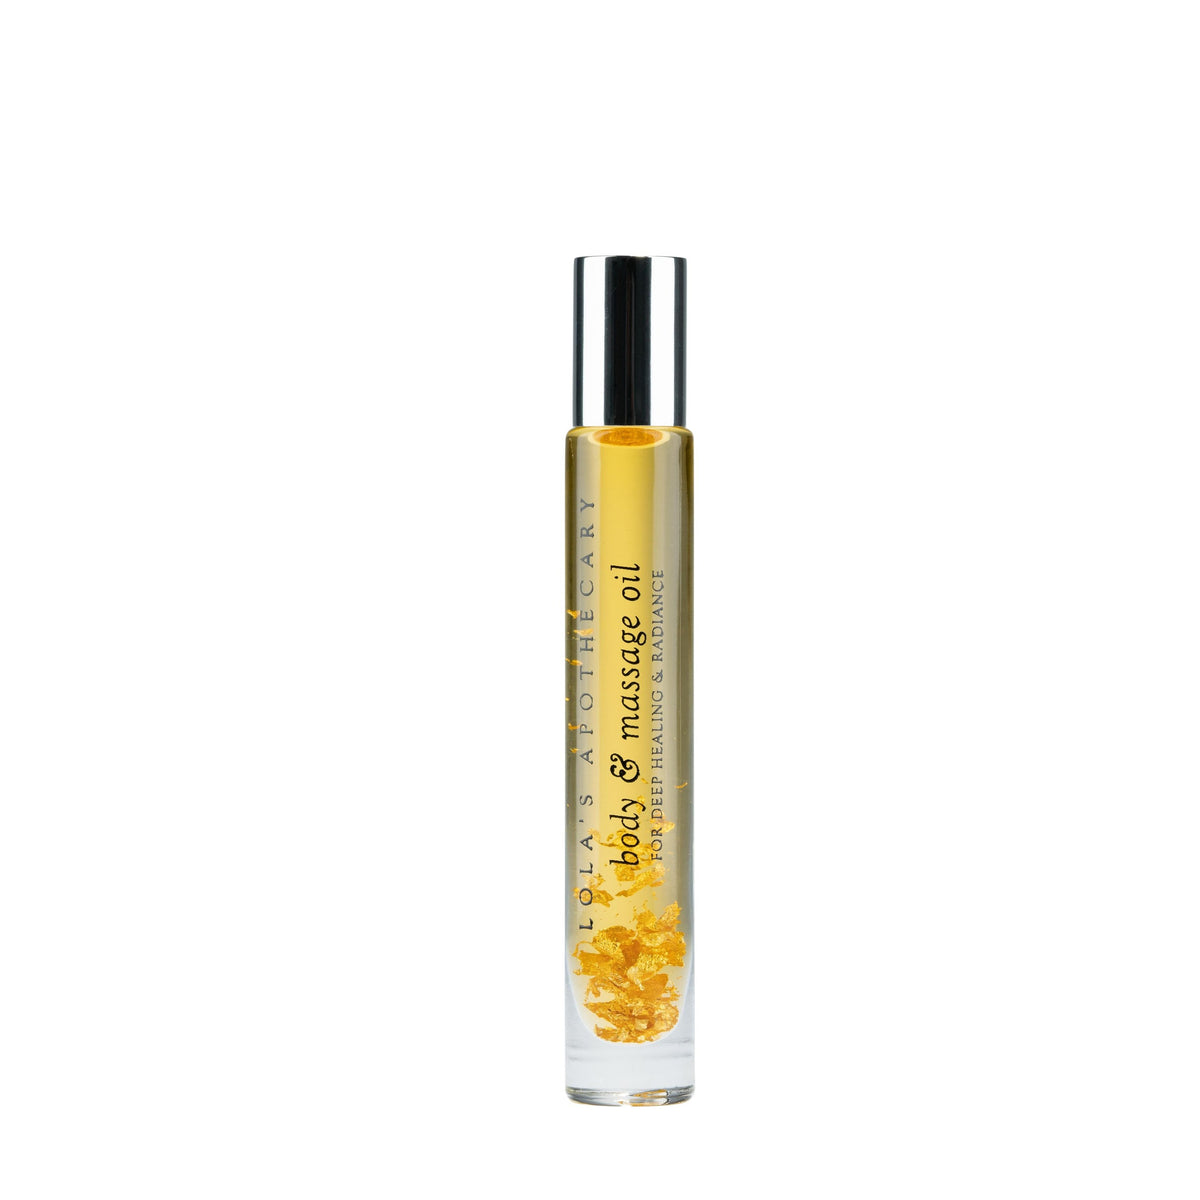 DIANA, Roll On Perfume Oil 6 mL (.2 oz)  Floral, Woody, Spicy - Maison  d'Orient